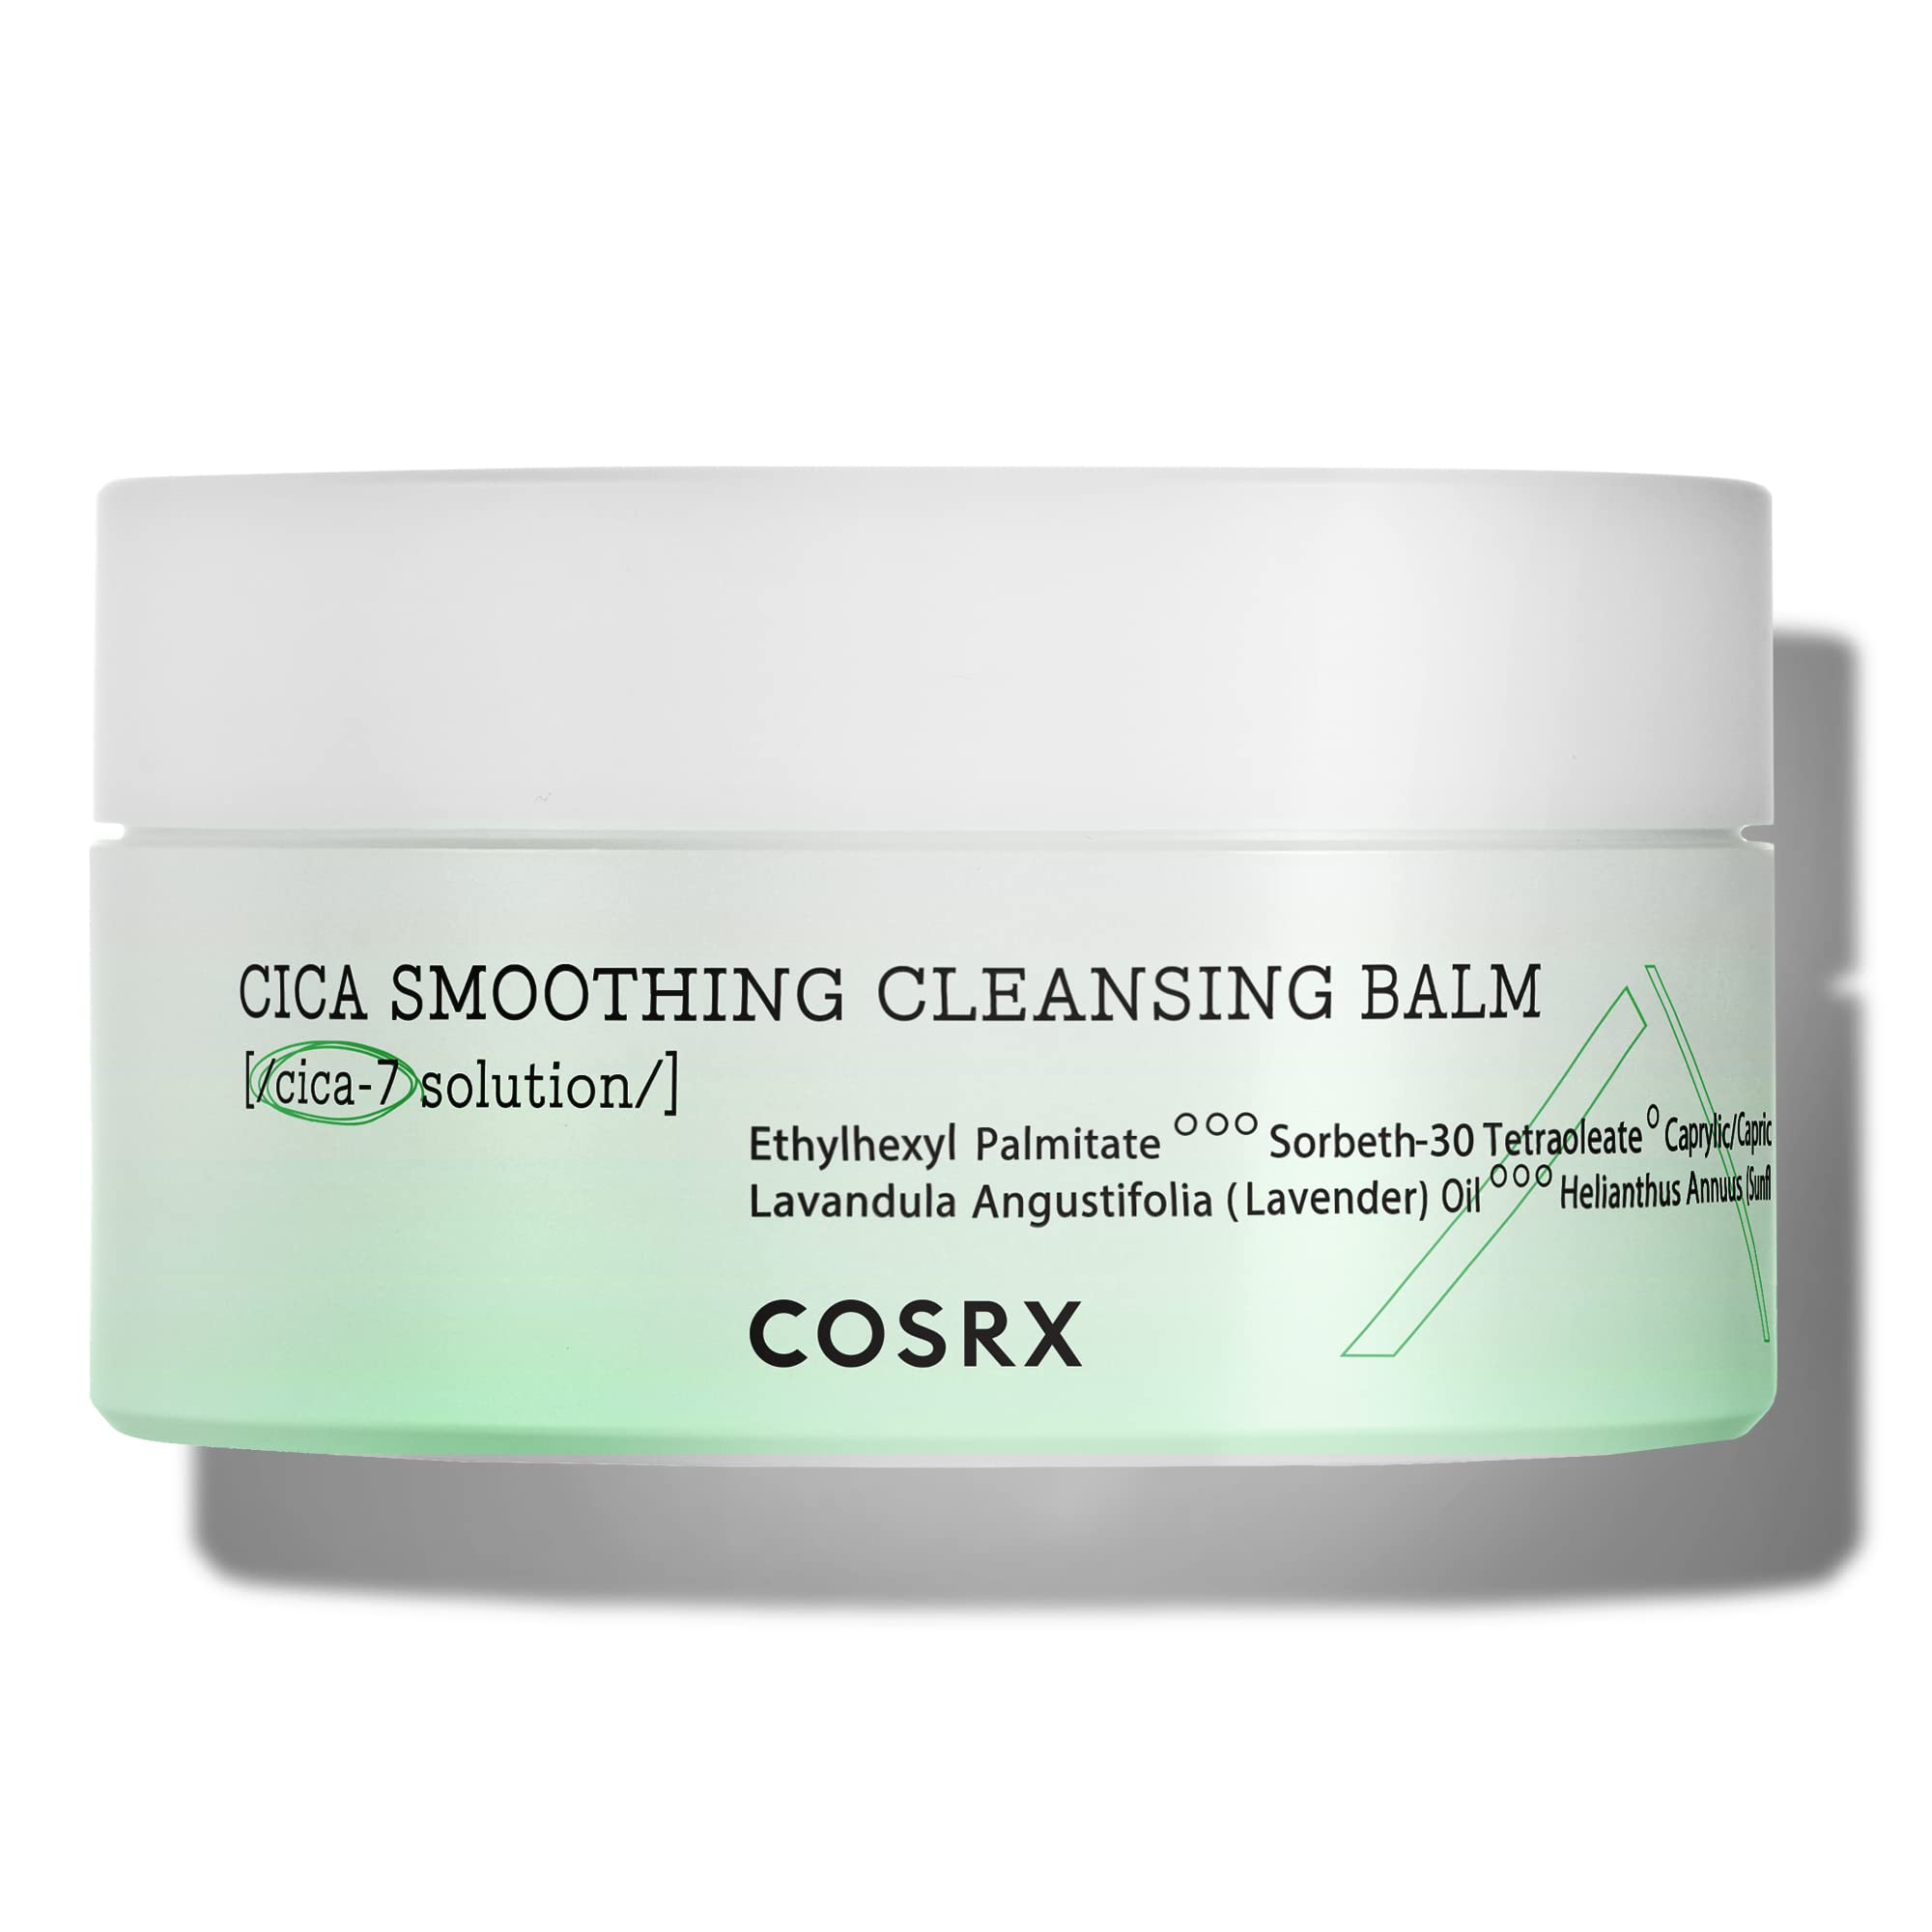 COSRX Pure Fit Cica Smoothing Cleansing Balm